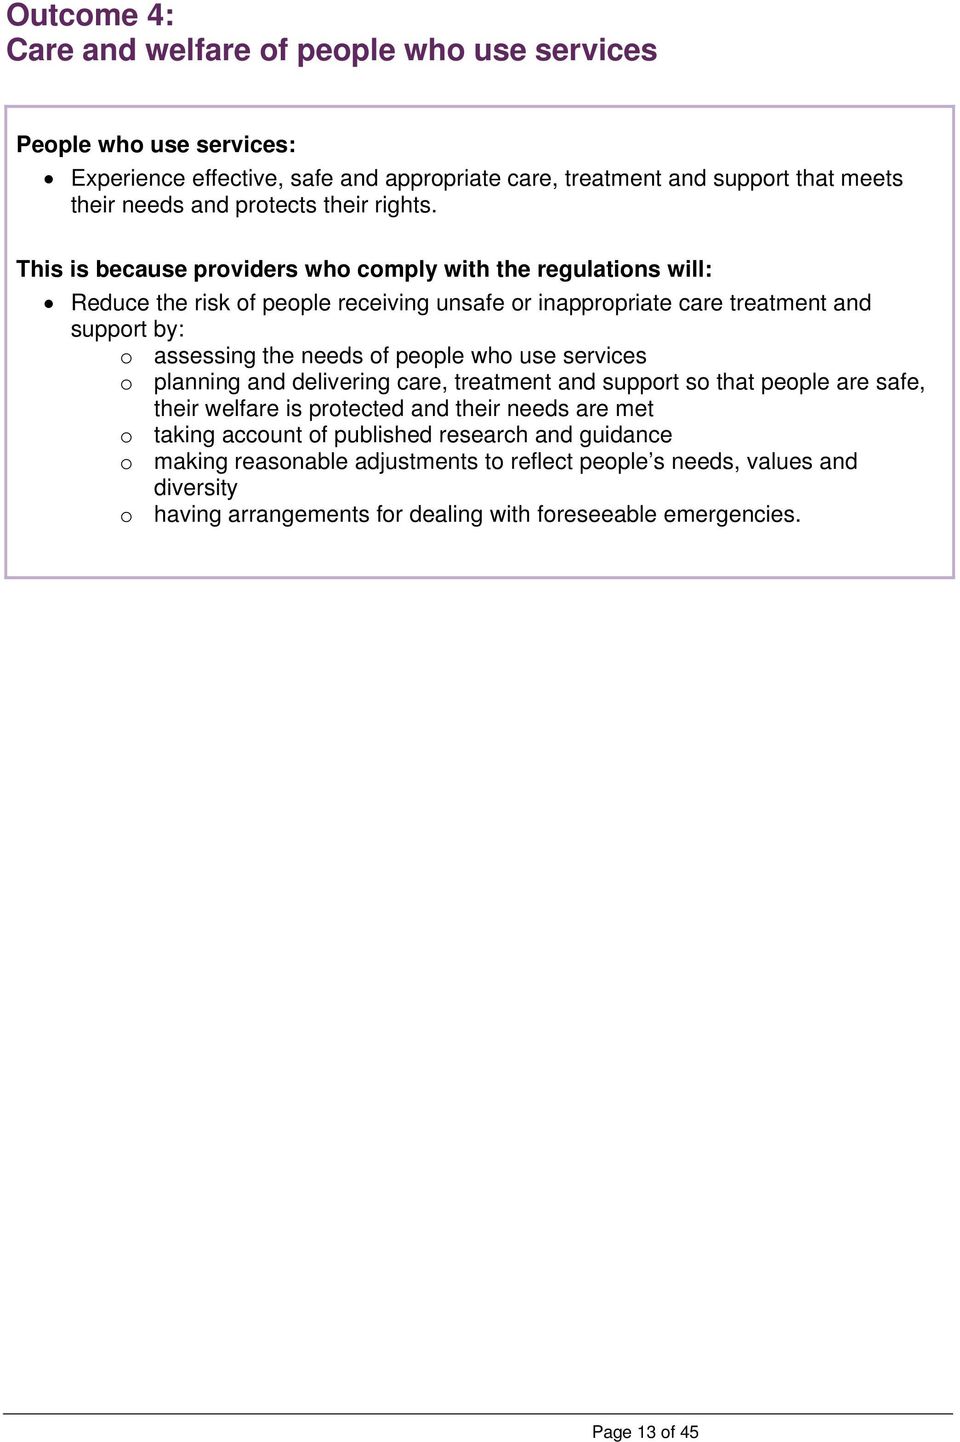 This is because providers who comply with the regulations will: Reduce the risk of people receiving unsafe or inappropriate care treatment and support by: o assessing the needs of